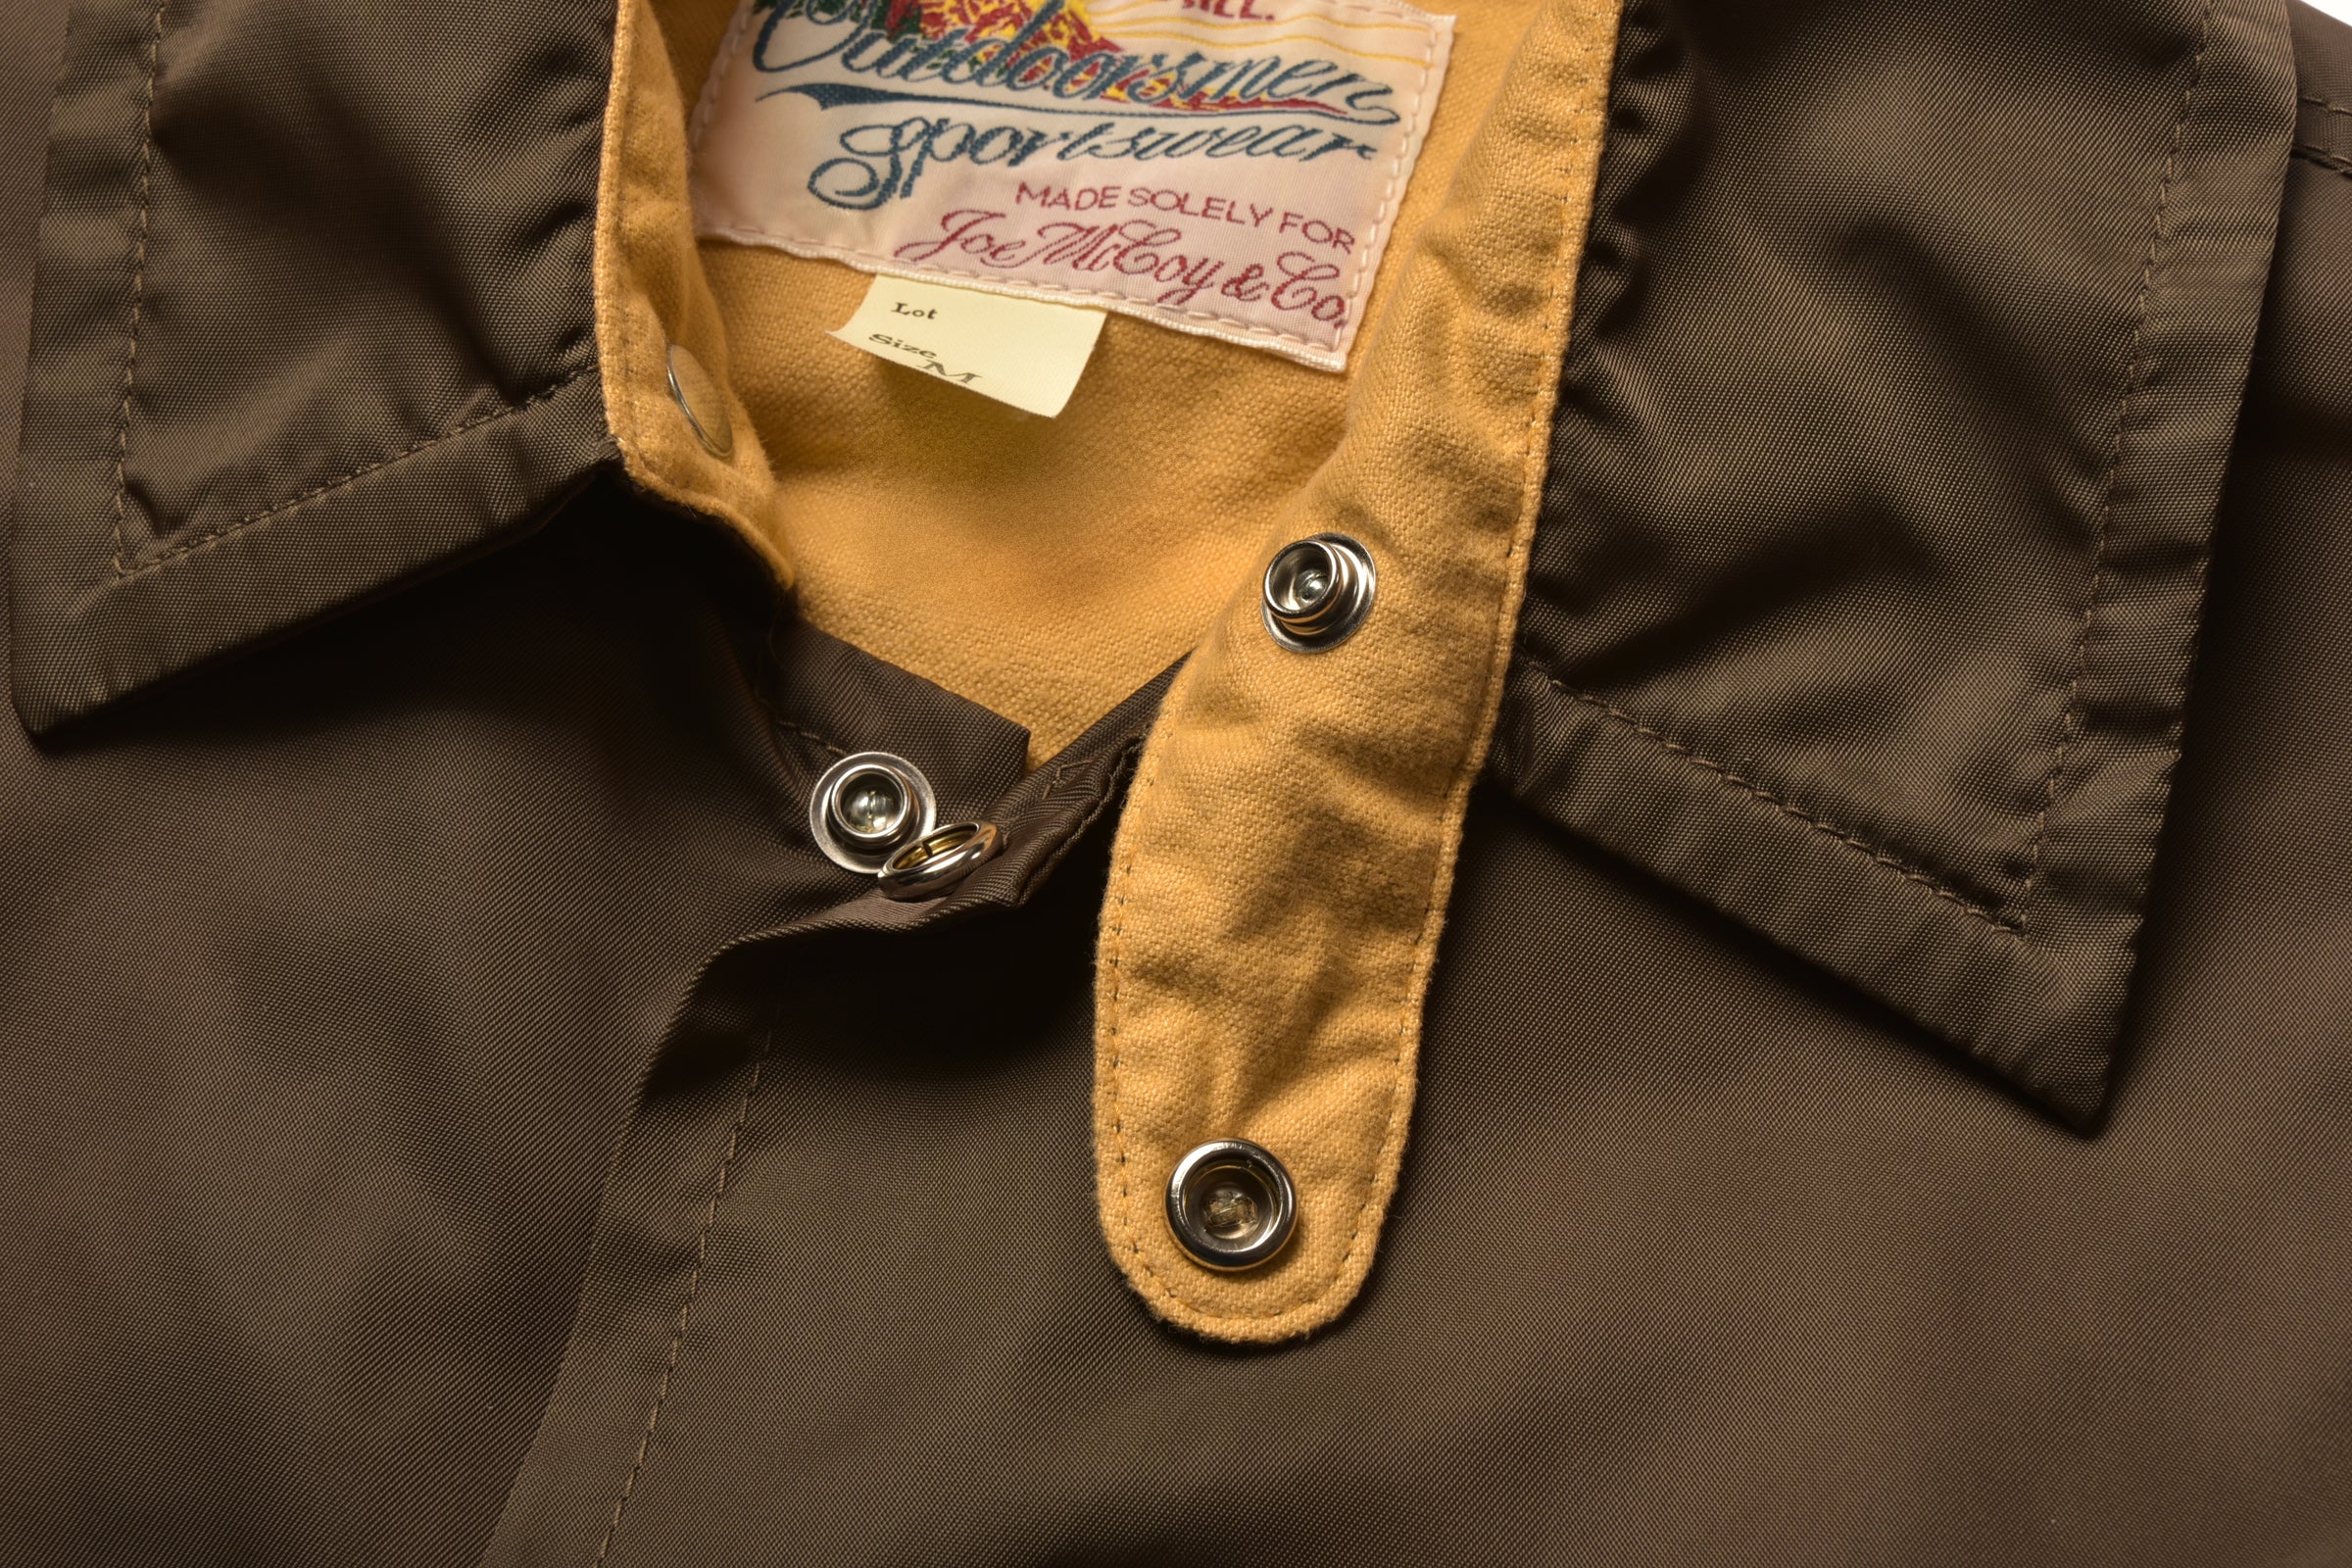 NYLON COTTON LINED COACH JACKET – The Real McCoy's